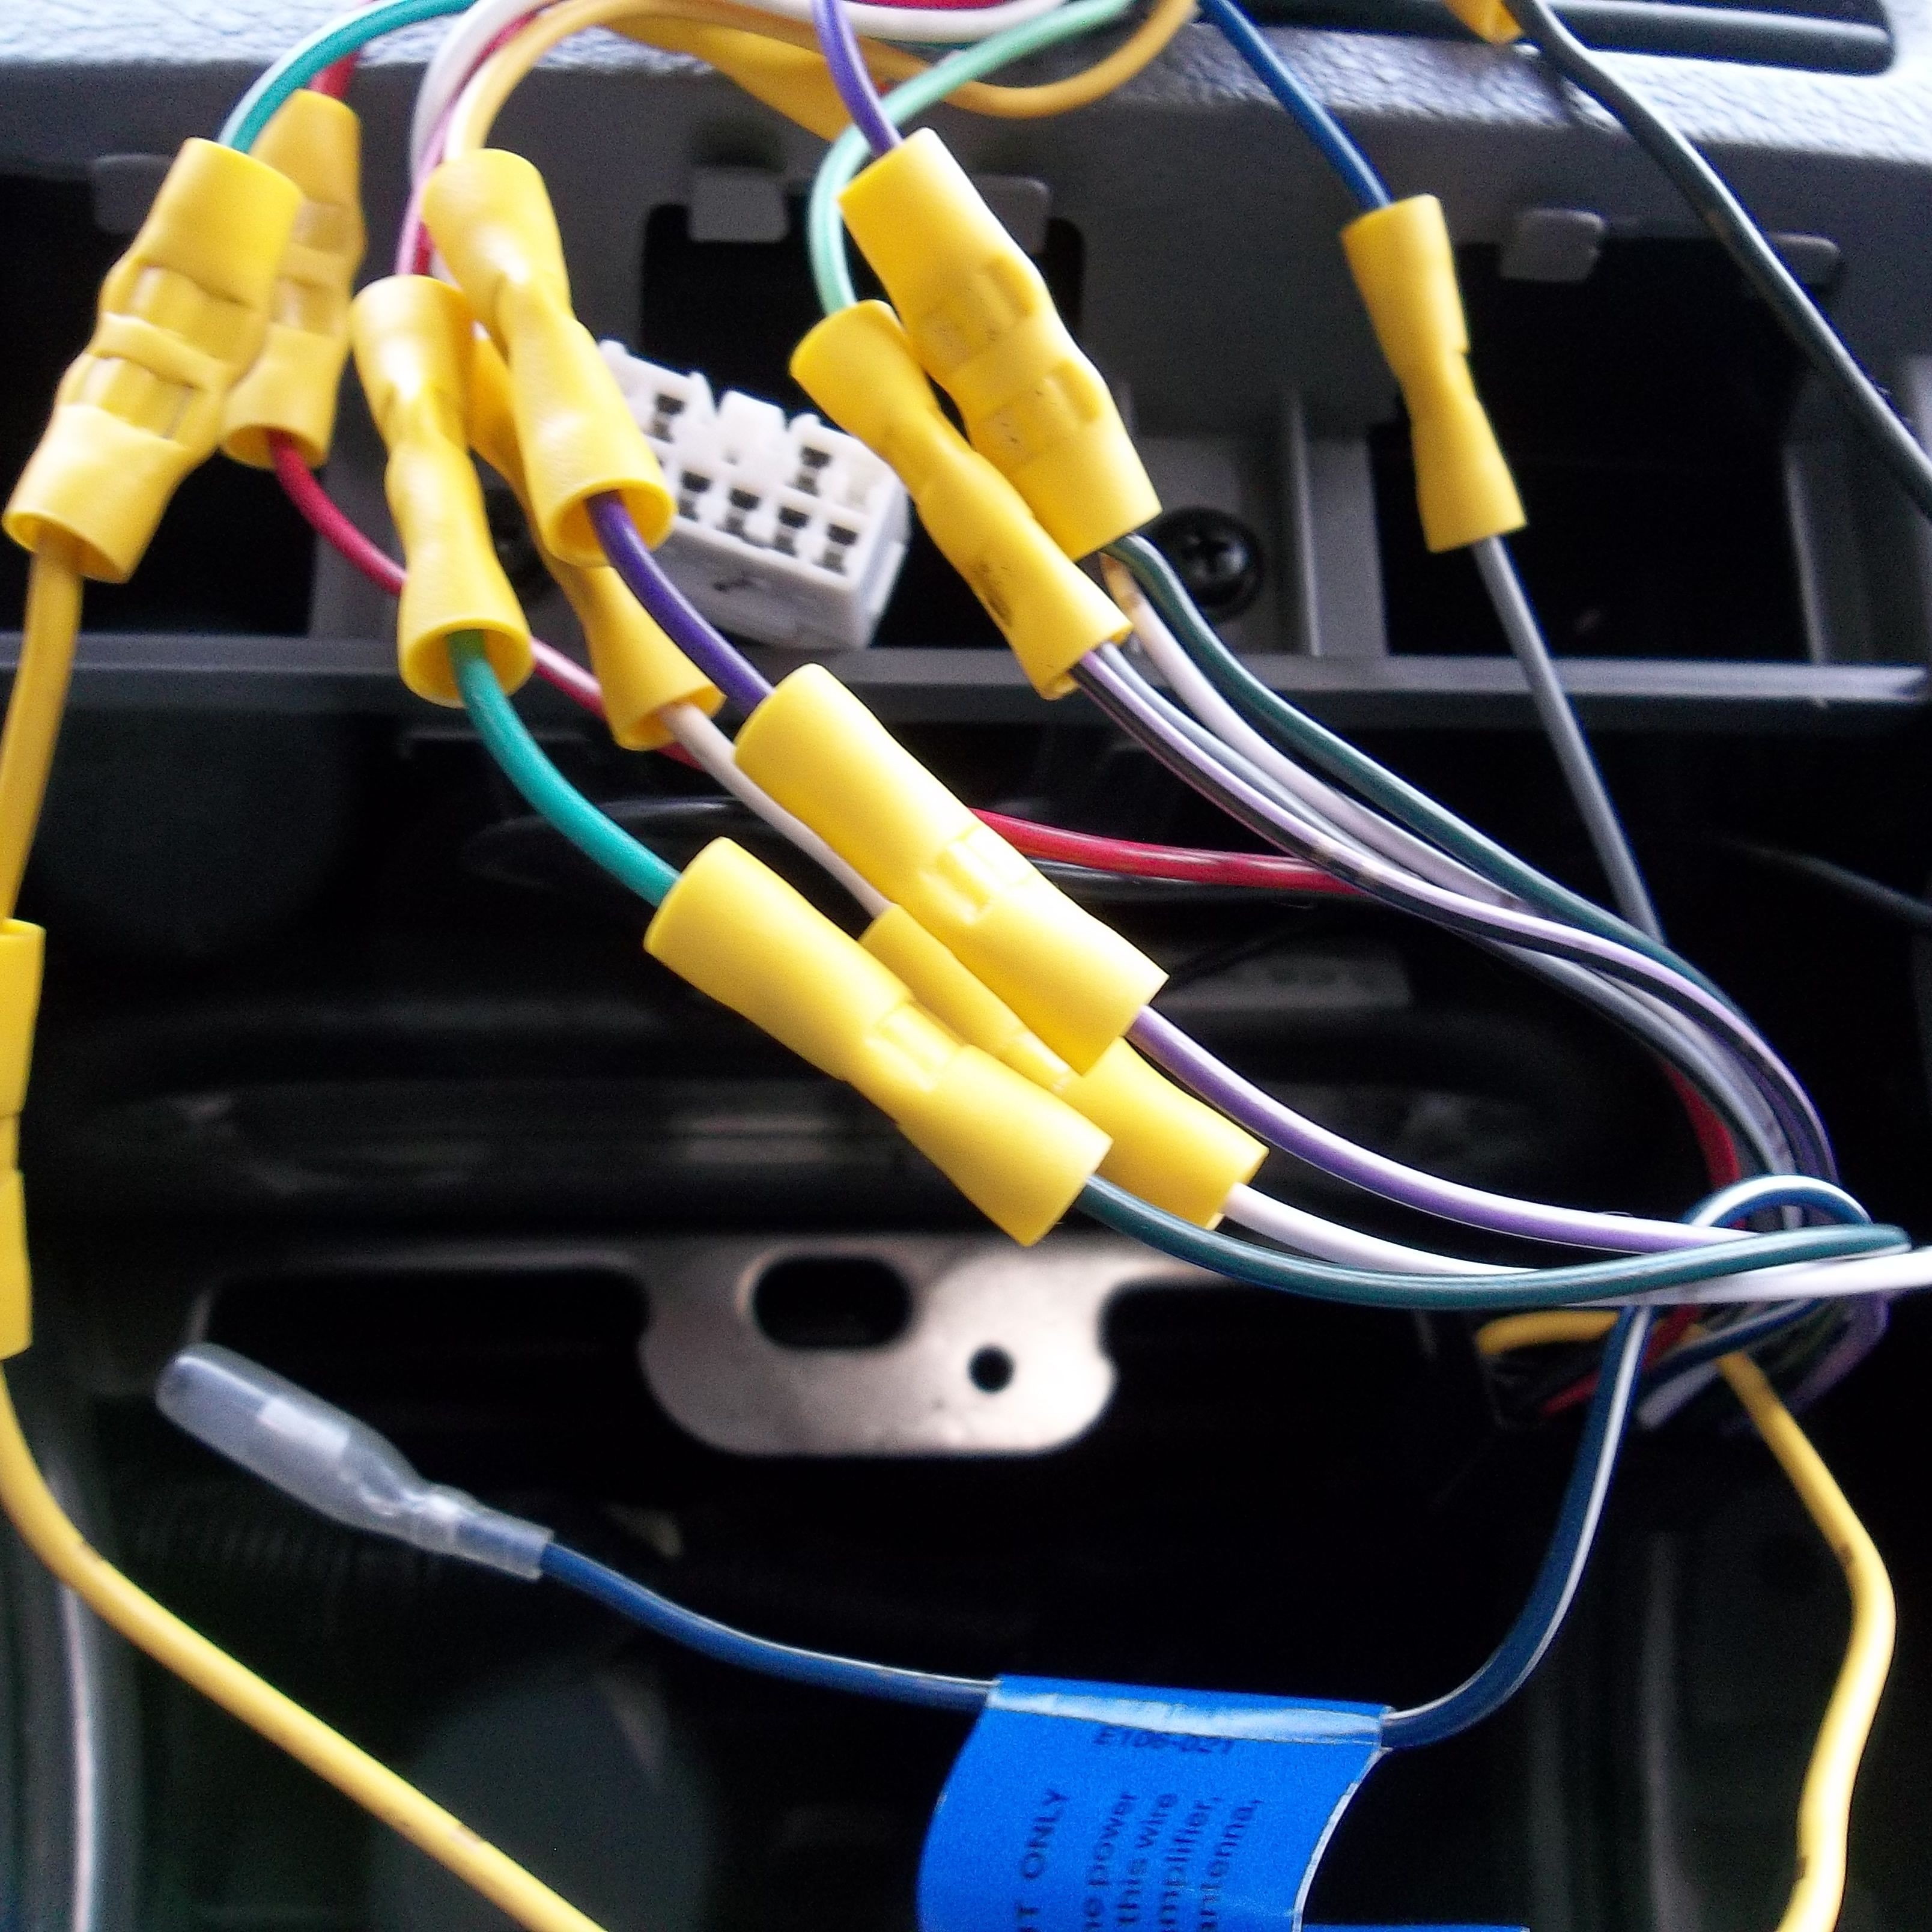 Car Stereo Power Amplifier Wiring Diagram What You Need to Know About Car Amp Wiring Of Car Stereo Power Amplifier Wiring Diagram